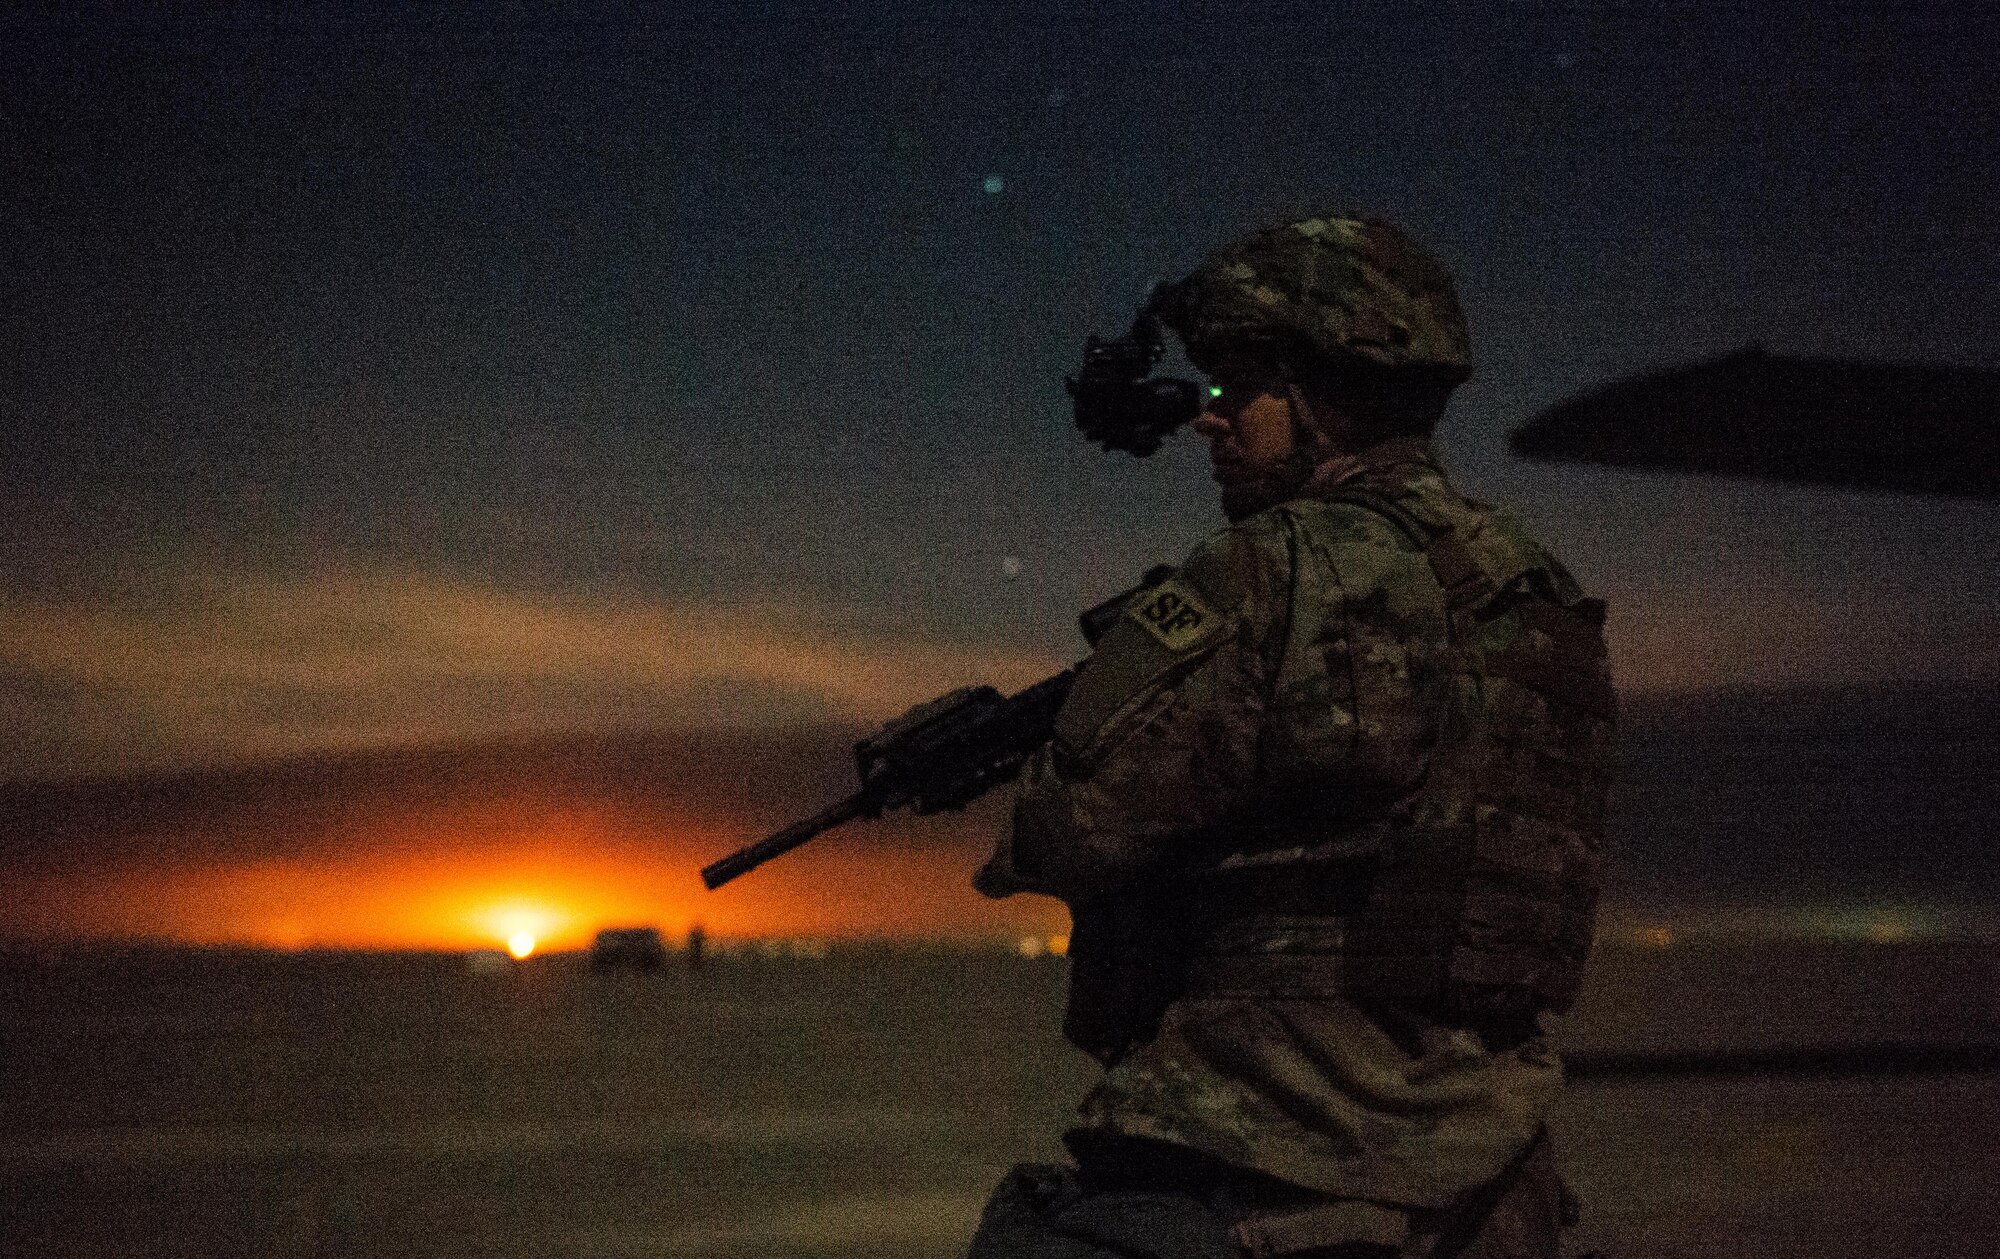 Senior Airman Henry Nokes, 386th Expeditionary Security Forces Squadron Fly-Away Security Team member, secures a section of airfield outside a C-130 Hercules at an undisclosed location in Southwest Asia, Feb. 4, 2017. Nokes was responsible for securing a flank of the aircraft while Airmen with the 737th Expeditionary Airlift Squadron delivered thousands of pounds in supplies to aid in the fight against the Islamic State of Iraq and the Levant and Mosul offensive. (U.S. Air Force photo by Senior Airman Jordan Castelan)